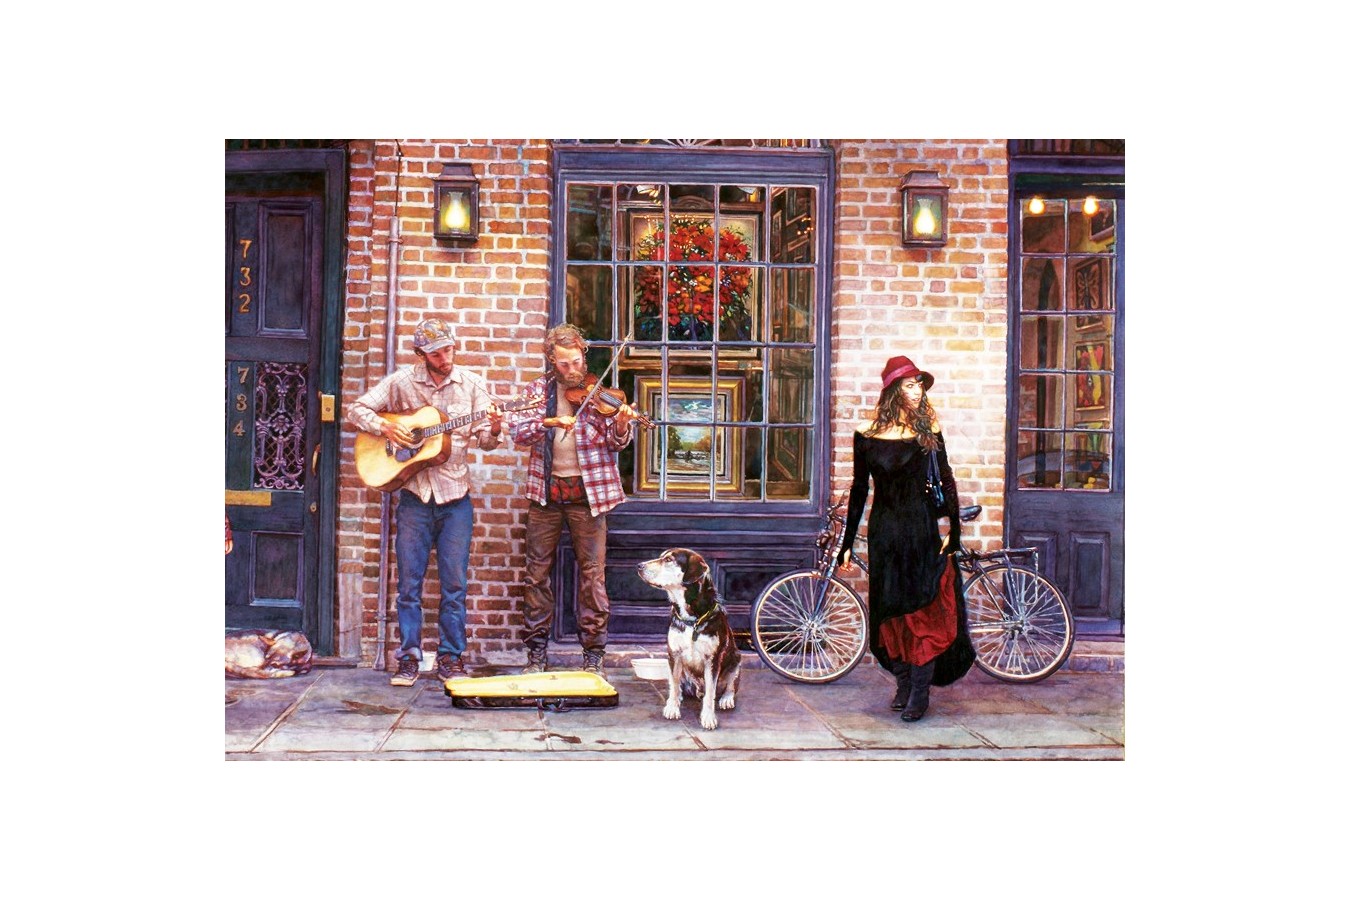 Puzzle Anatolian - The Sight and Sounds of New Orleans, 2000 piese (3932)